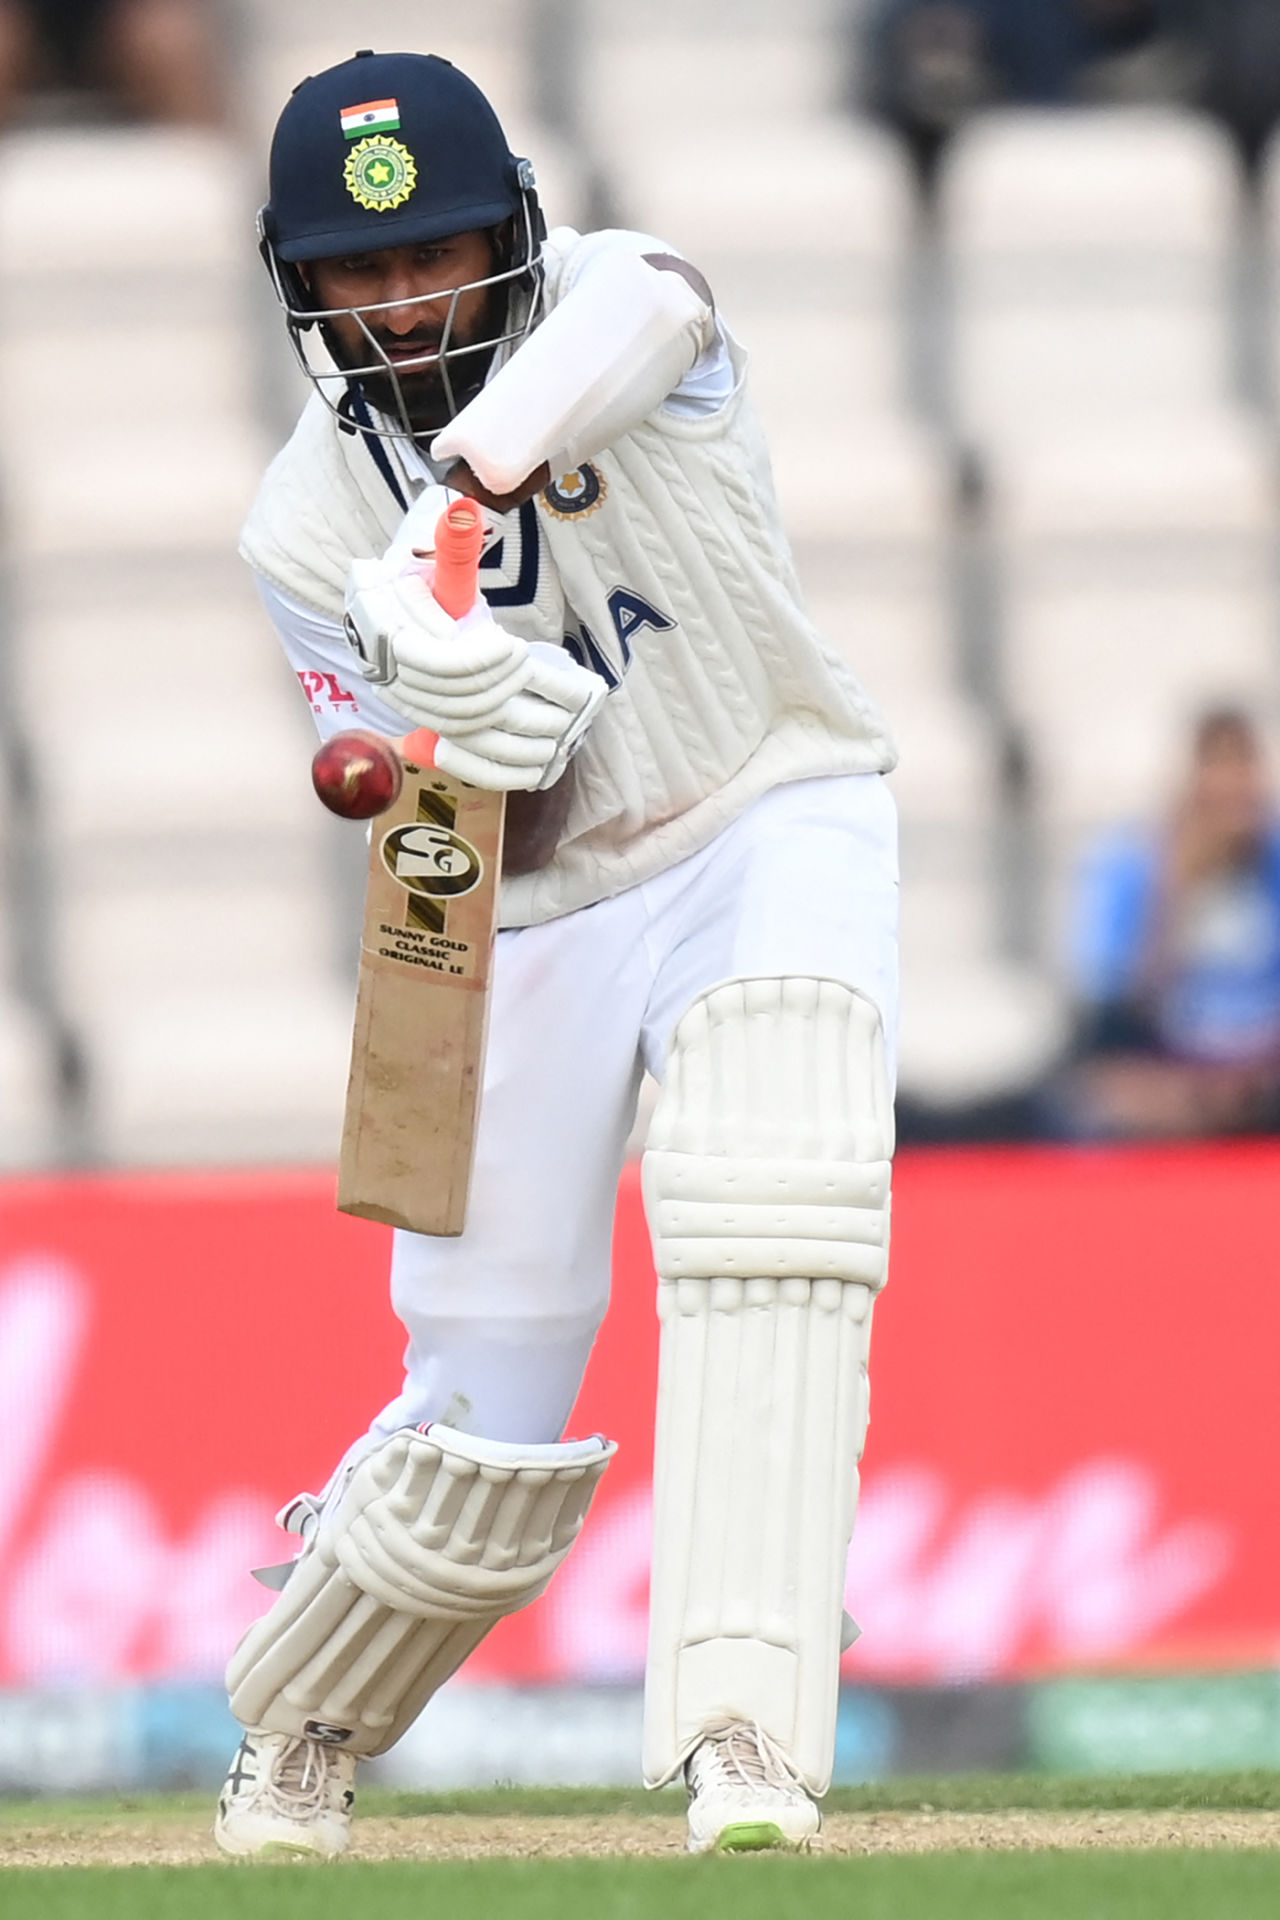 Cheteswhar Pujara gets behind one, World Test Championship (WTC) final, 5th day, Southampton, June 22, 2021